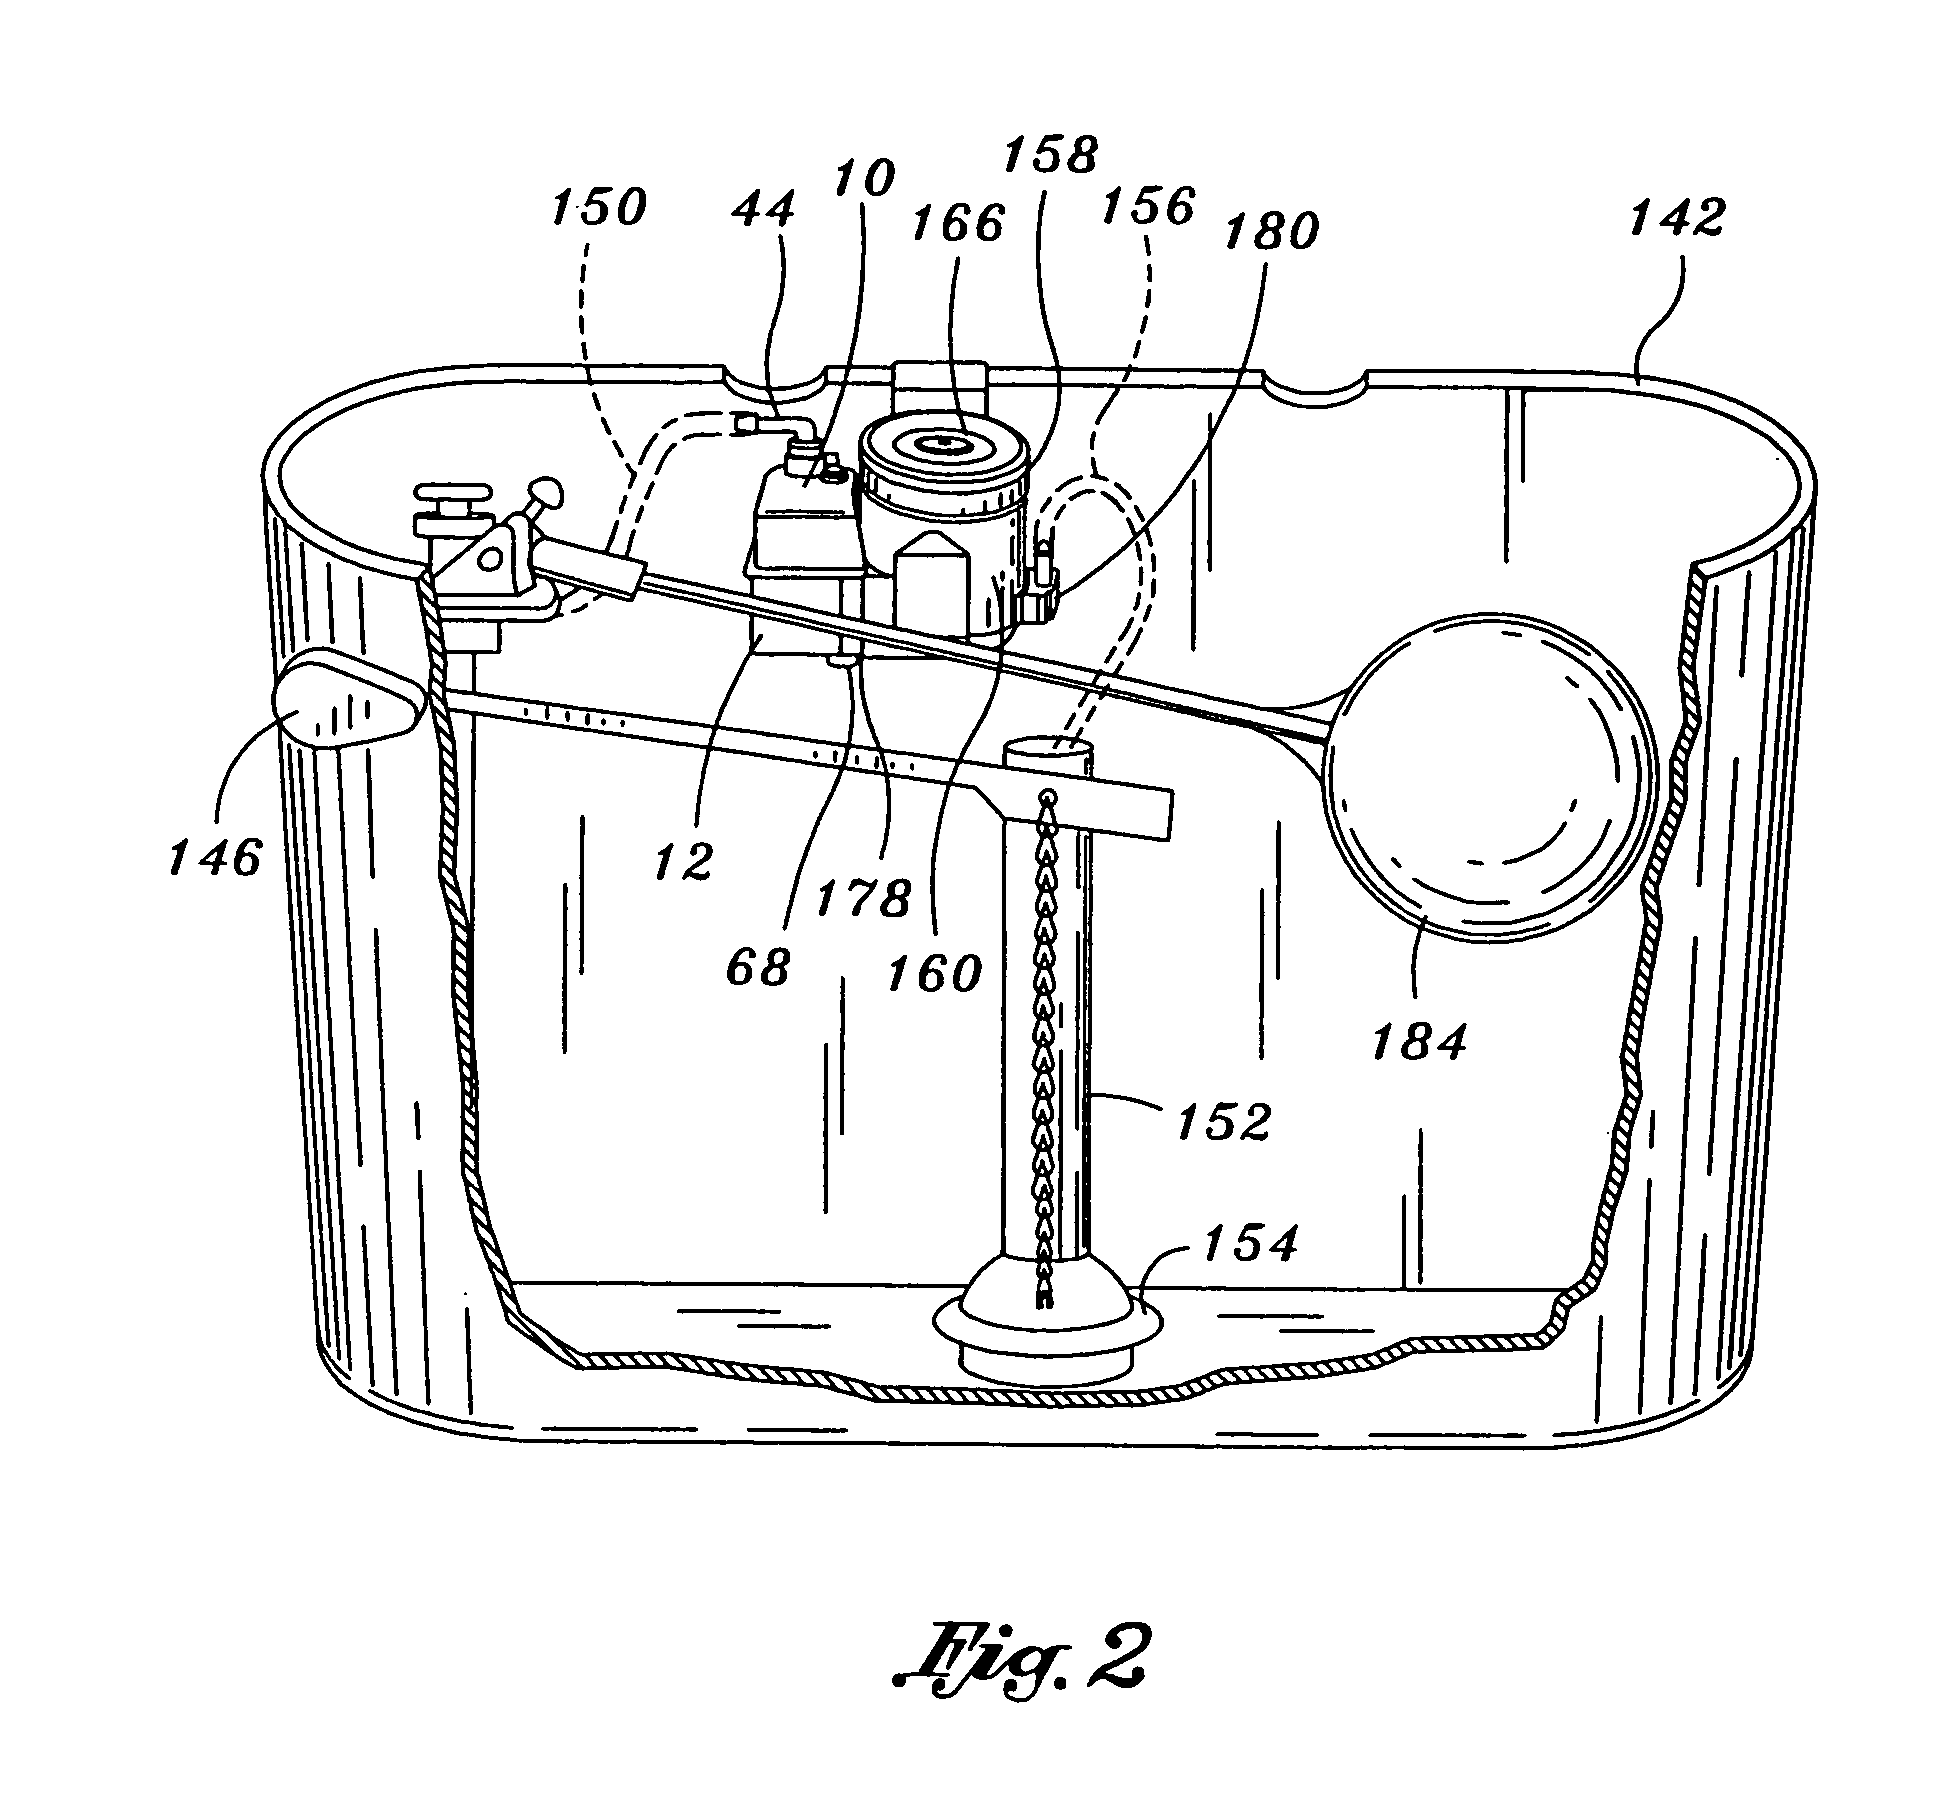 Automatic cleaning assembly for a toilet bowl